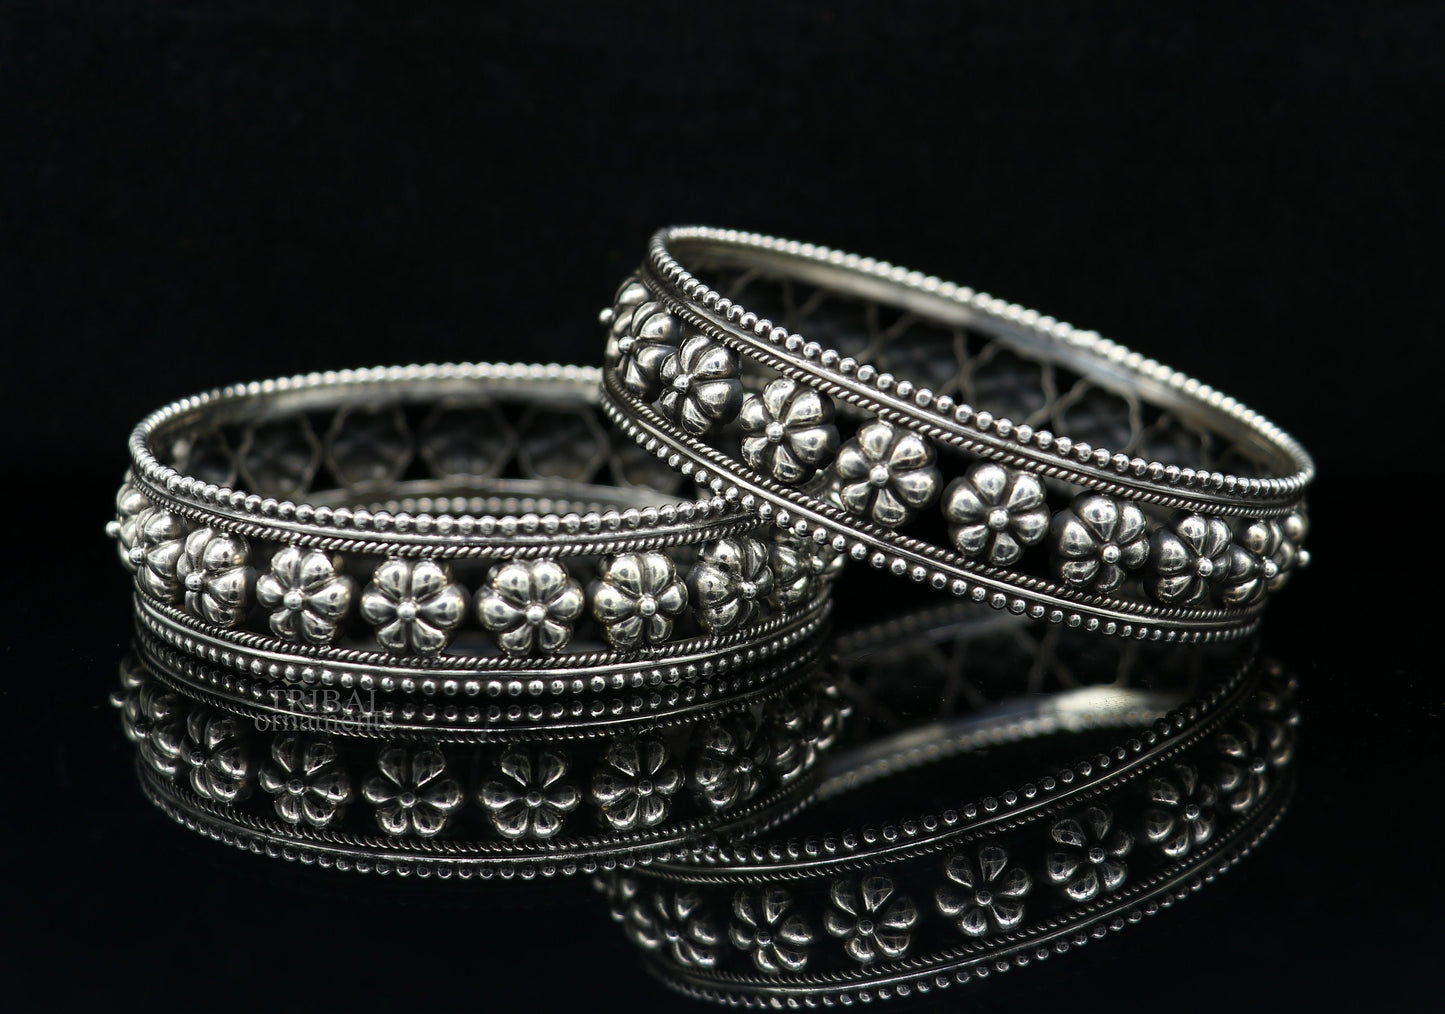 925 sterling silver handmade Gorgeous Vintage floral design bangle bracelet tribal ethnic jewelry best bride gifting jewelry nba312 - TRIBAL ORNAMENTS